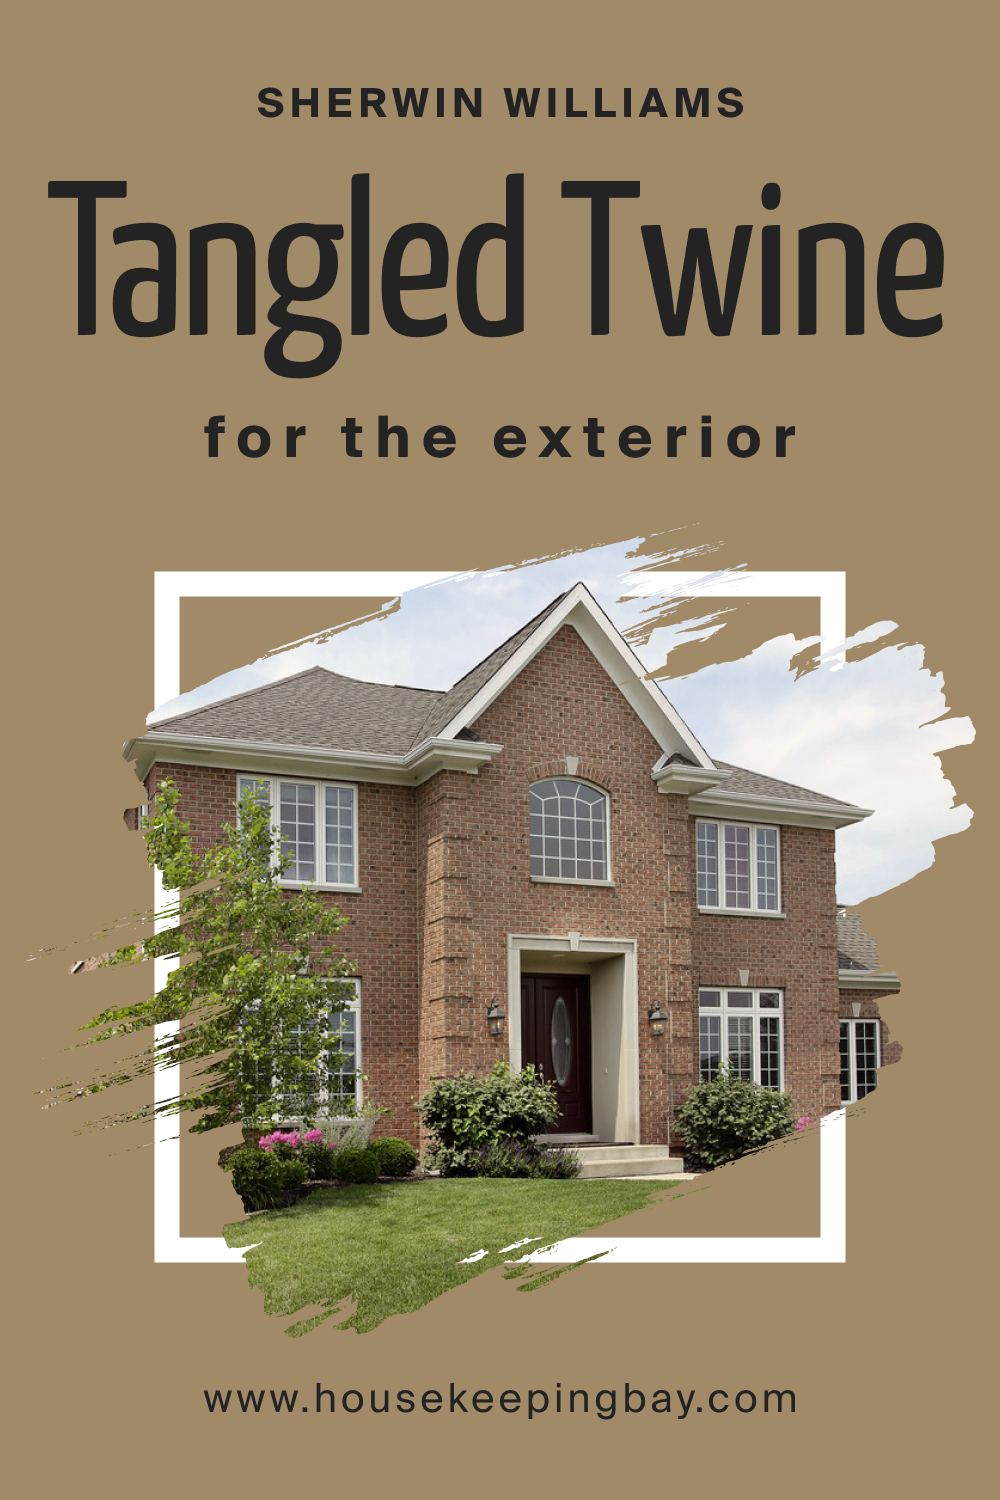 Sherwin Williams. SW 9538 Tangled Twine For the exterior